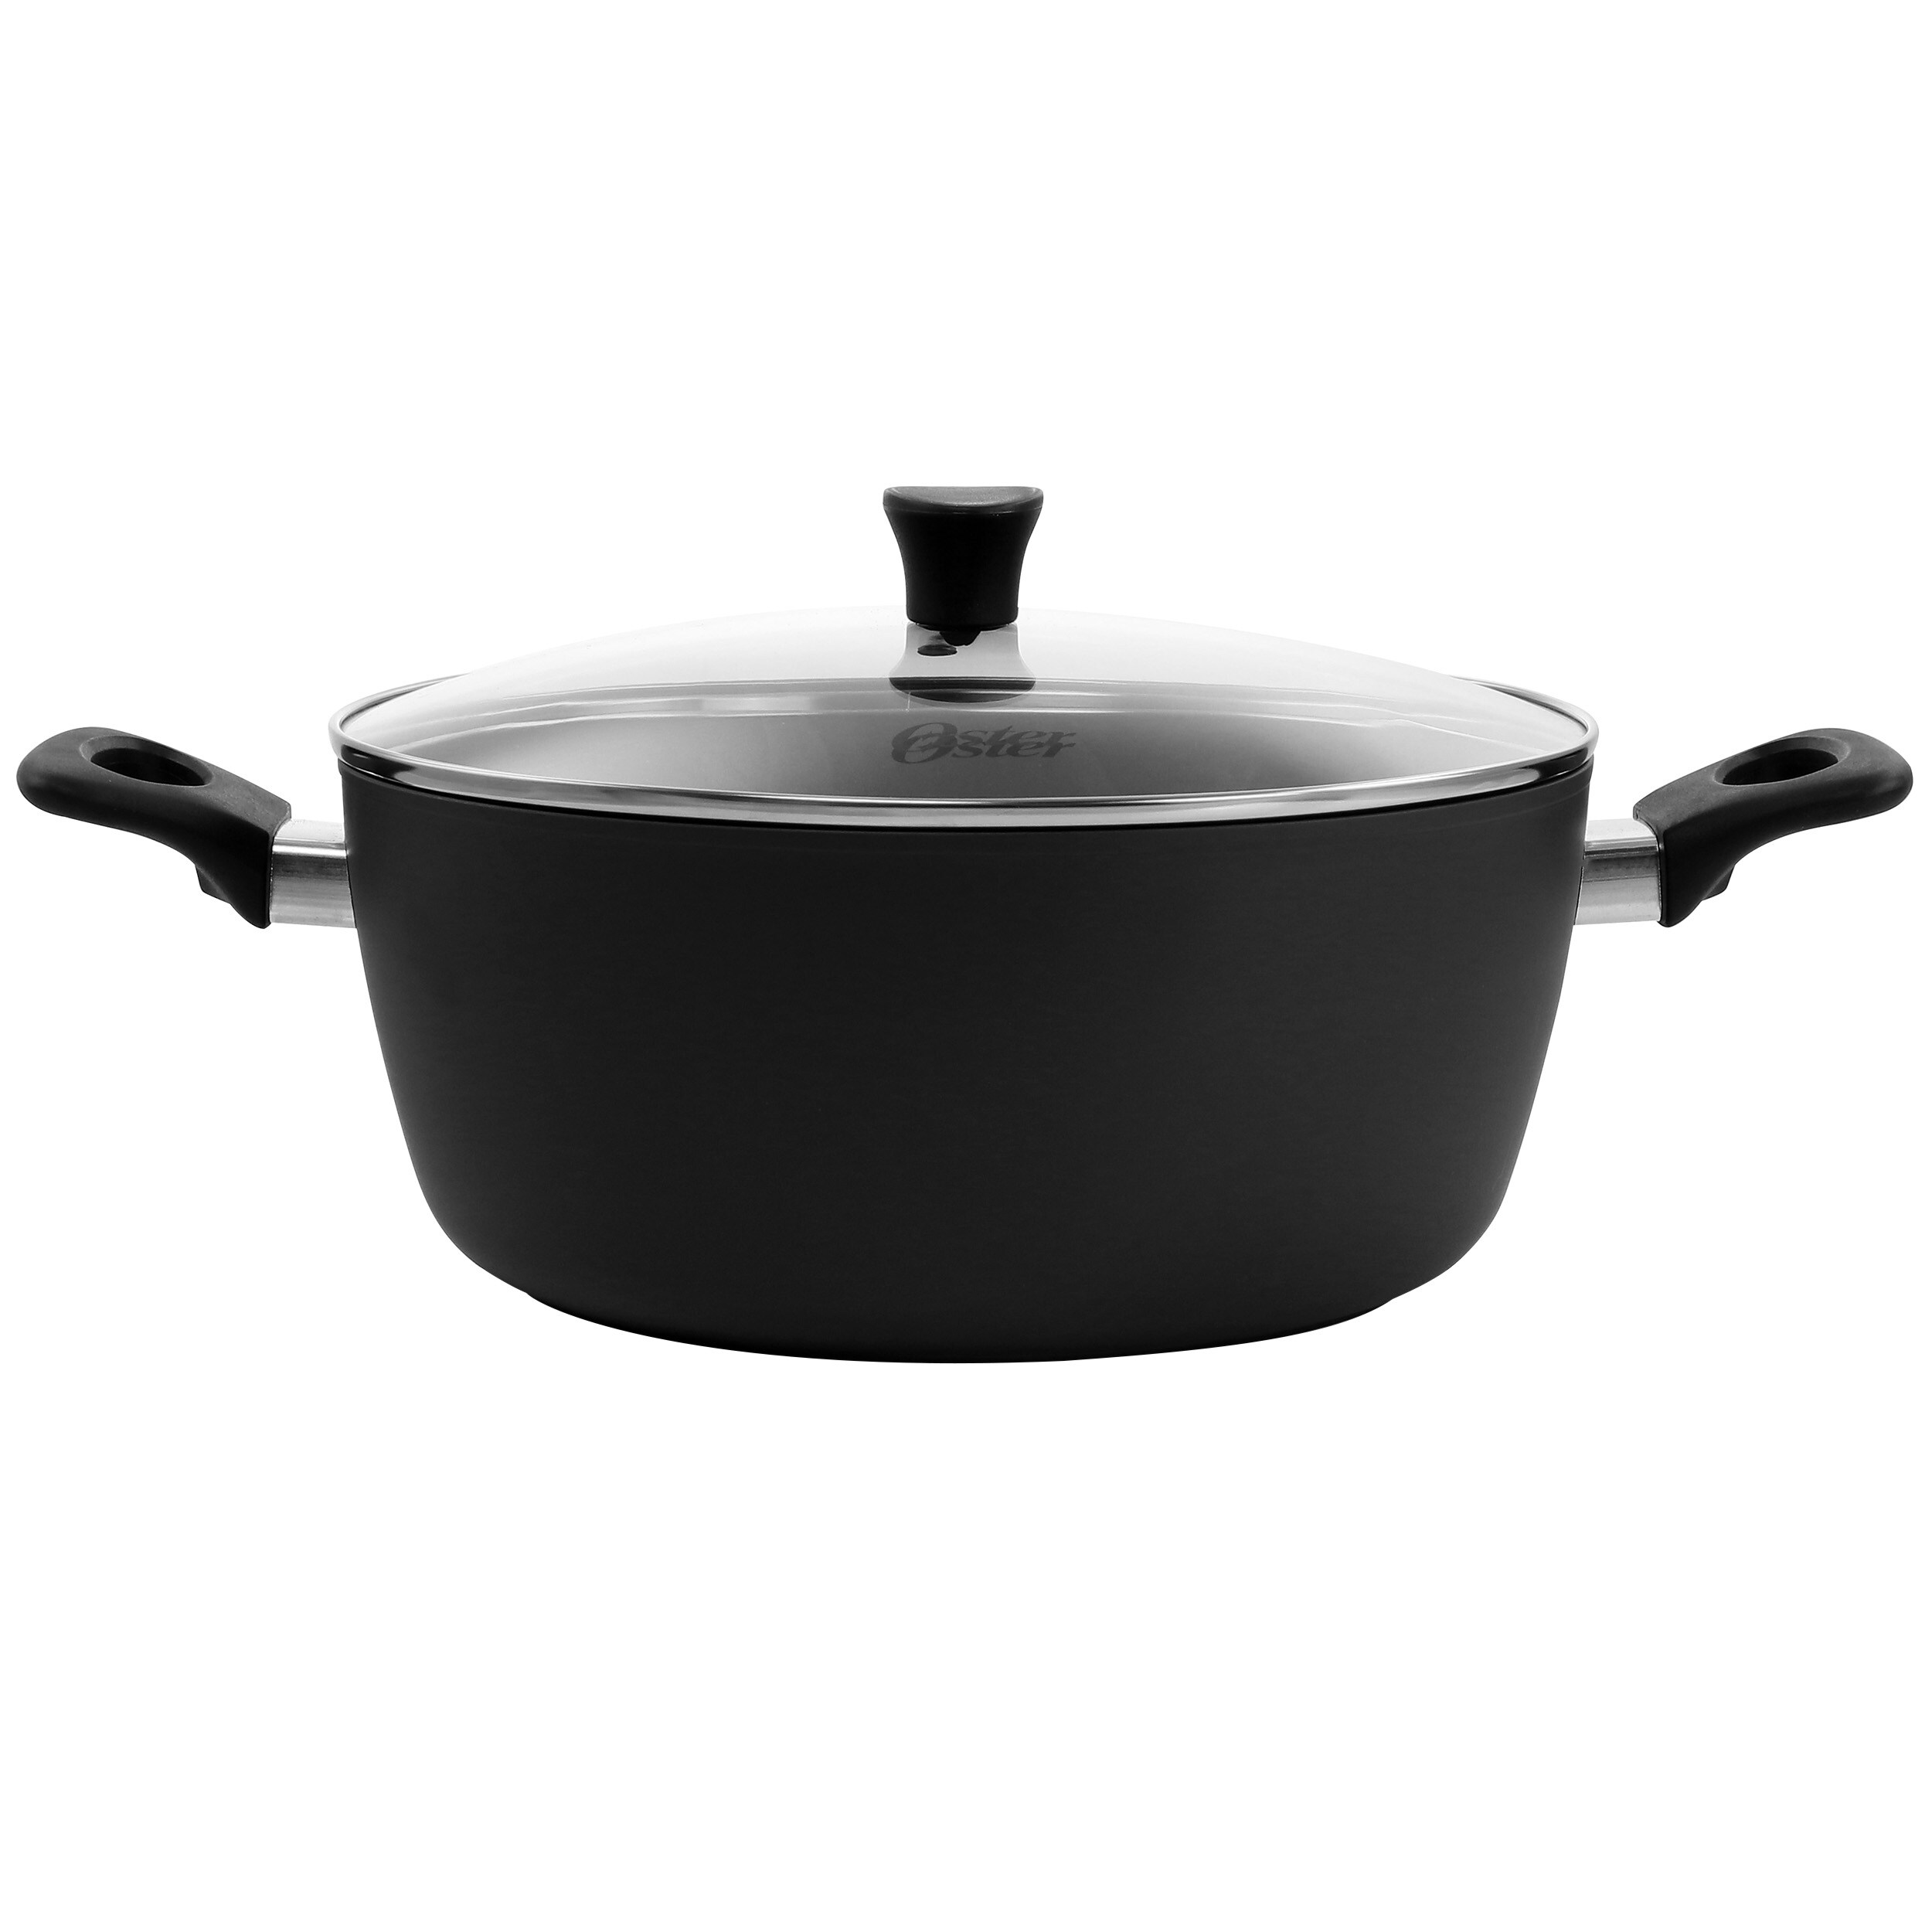 https://ak1.ostkcdn.com/images/products/is/images/direct/46af9f8b5df06dbddbe14b72727d74433ea7e493/Oster-Non-Stick-6.5-Quart-Aluminum-Dutch-Oven-with-Lid.jpg